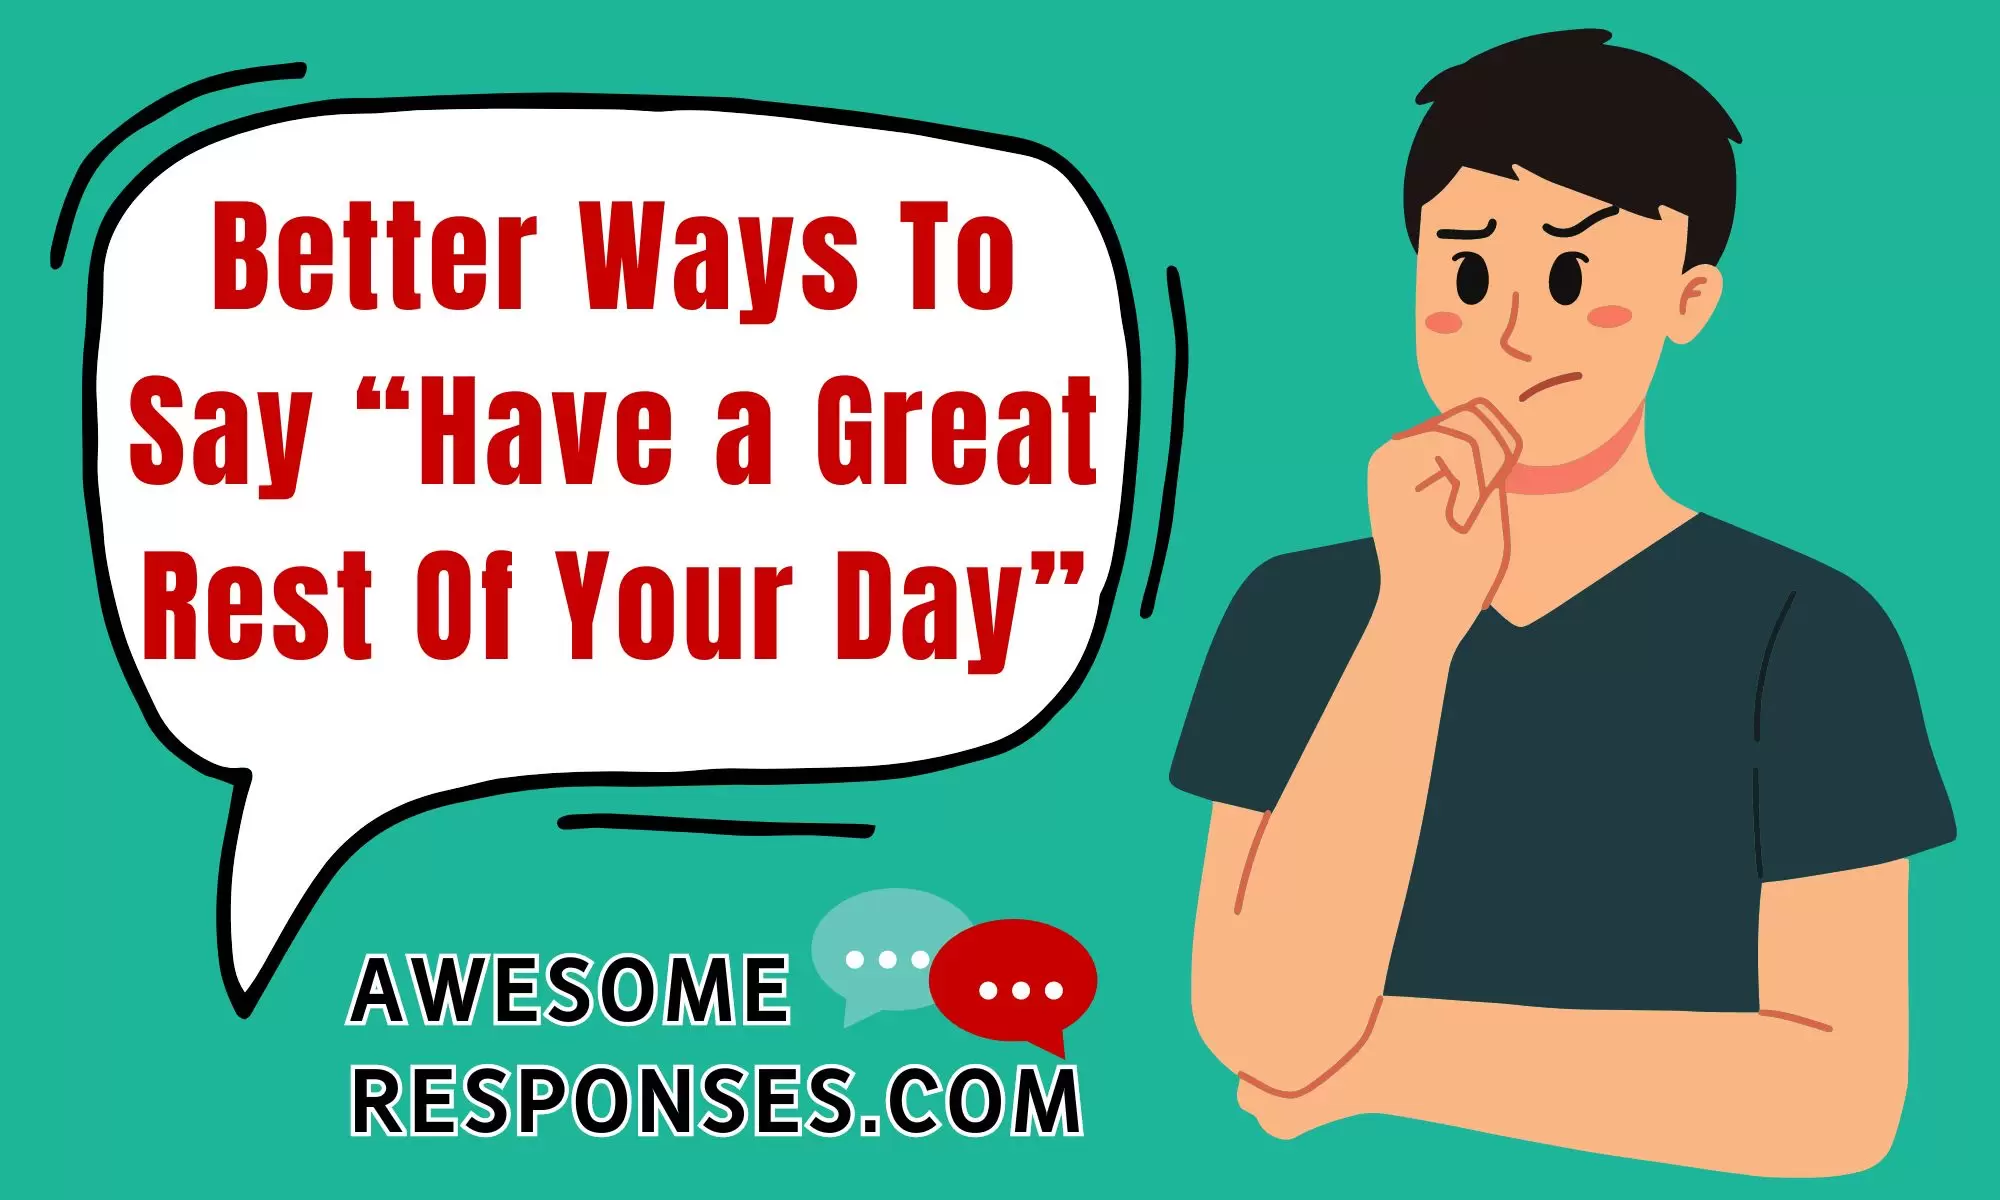 Better Ways To Say “Have a Great Rest Of Your Day”